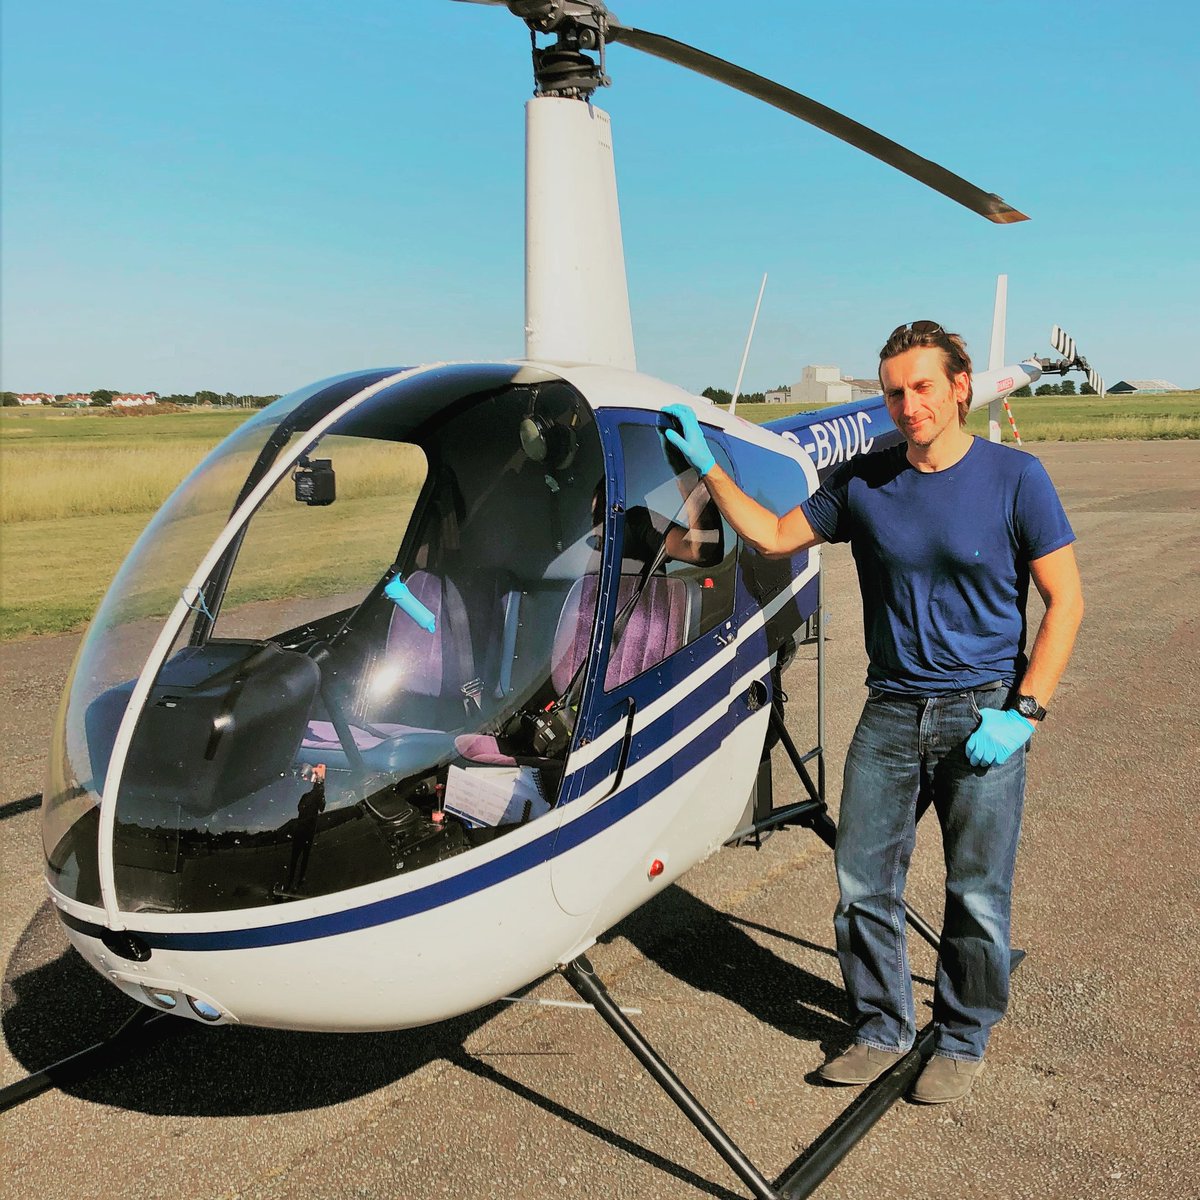 More congratulations in order! A very well done to Dan for completing his first solo in the R22! #PilotTraining #FirstSolo #Helicopter #R22 #TheCoolestWayToTravel